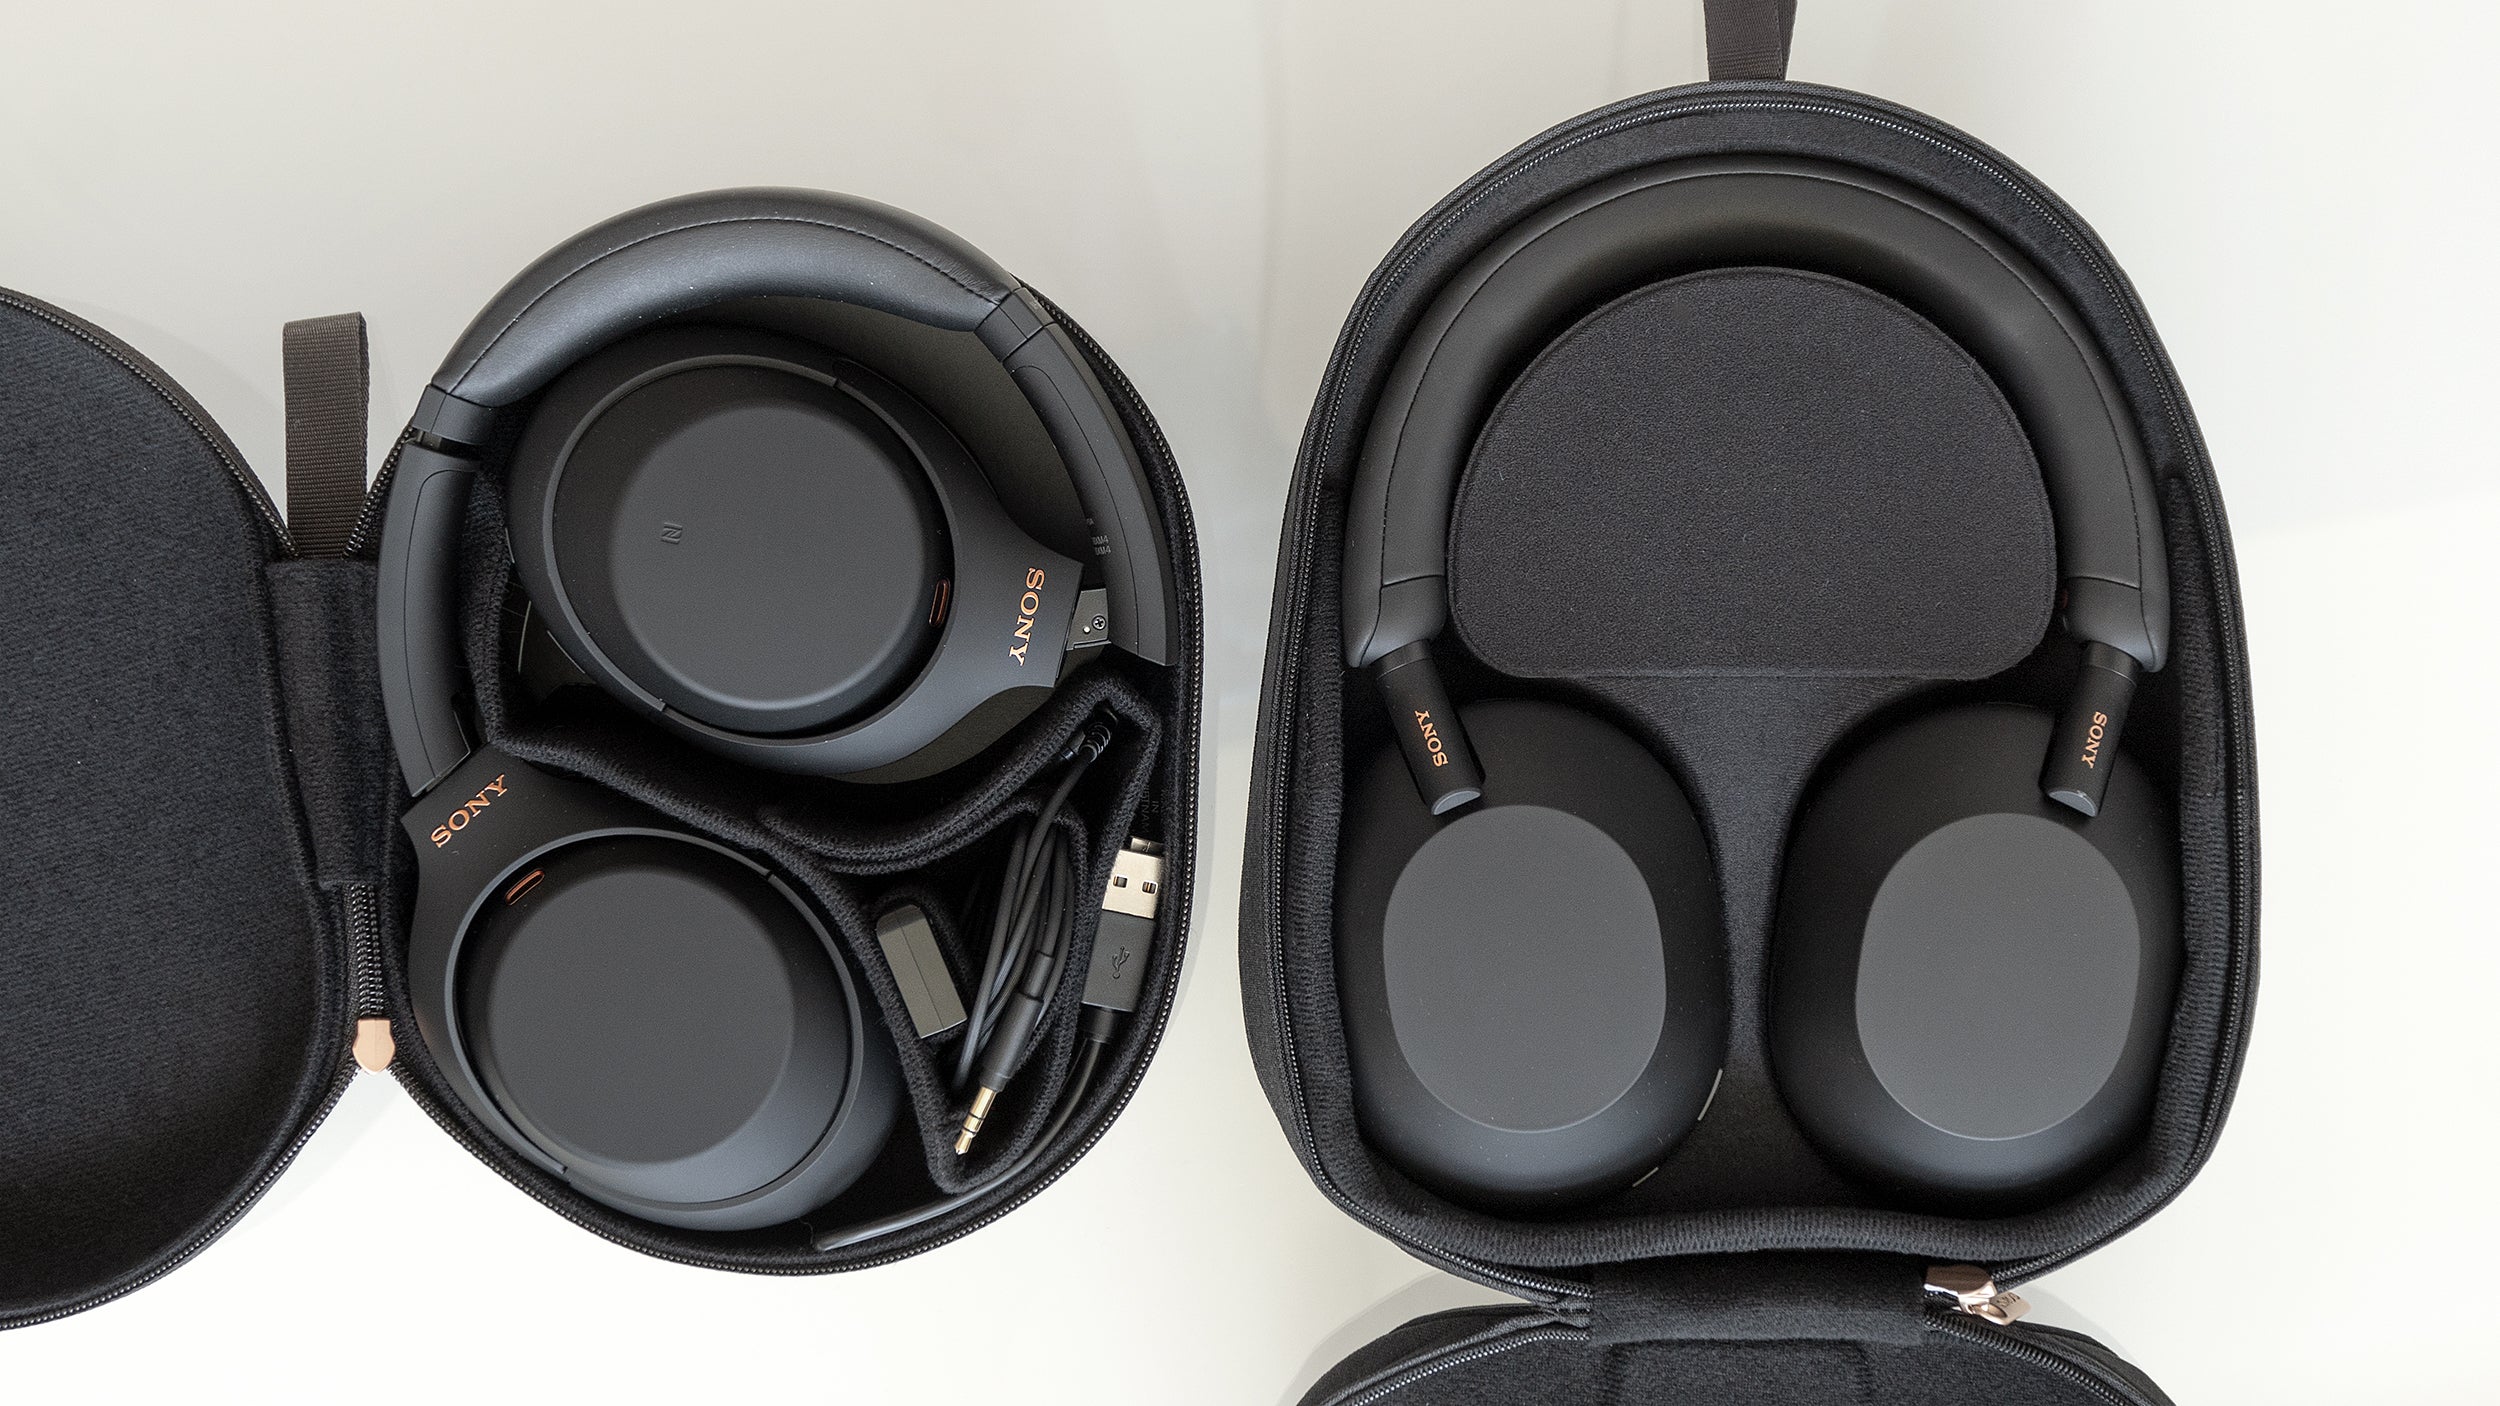 As a result, the carrying case for the Sony WH-1000XM5 (right) is a bit larger than the case included with the WH-1000XM4 (left). (Photo: Andrew Liszewski - Gizmodo)